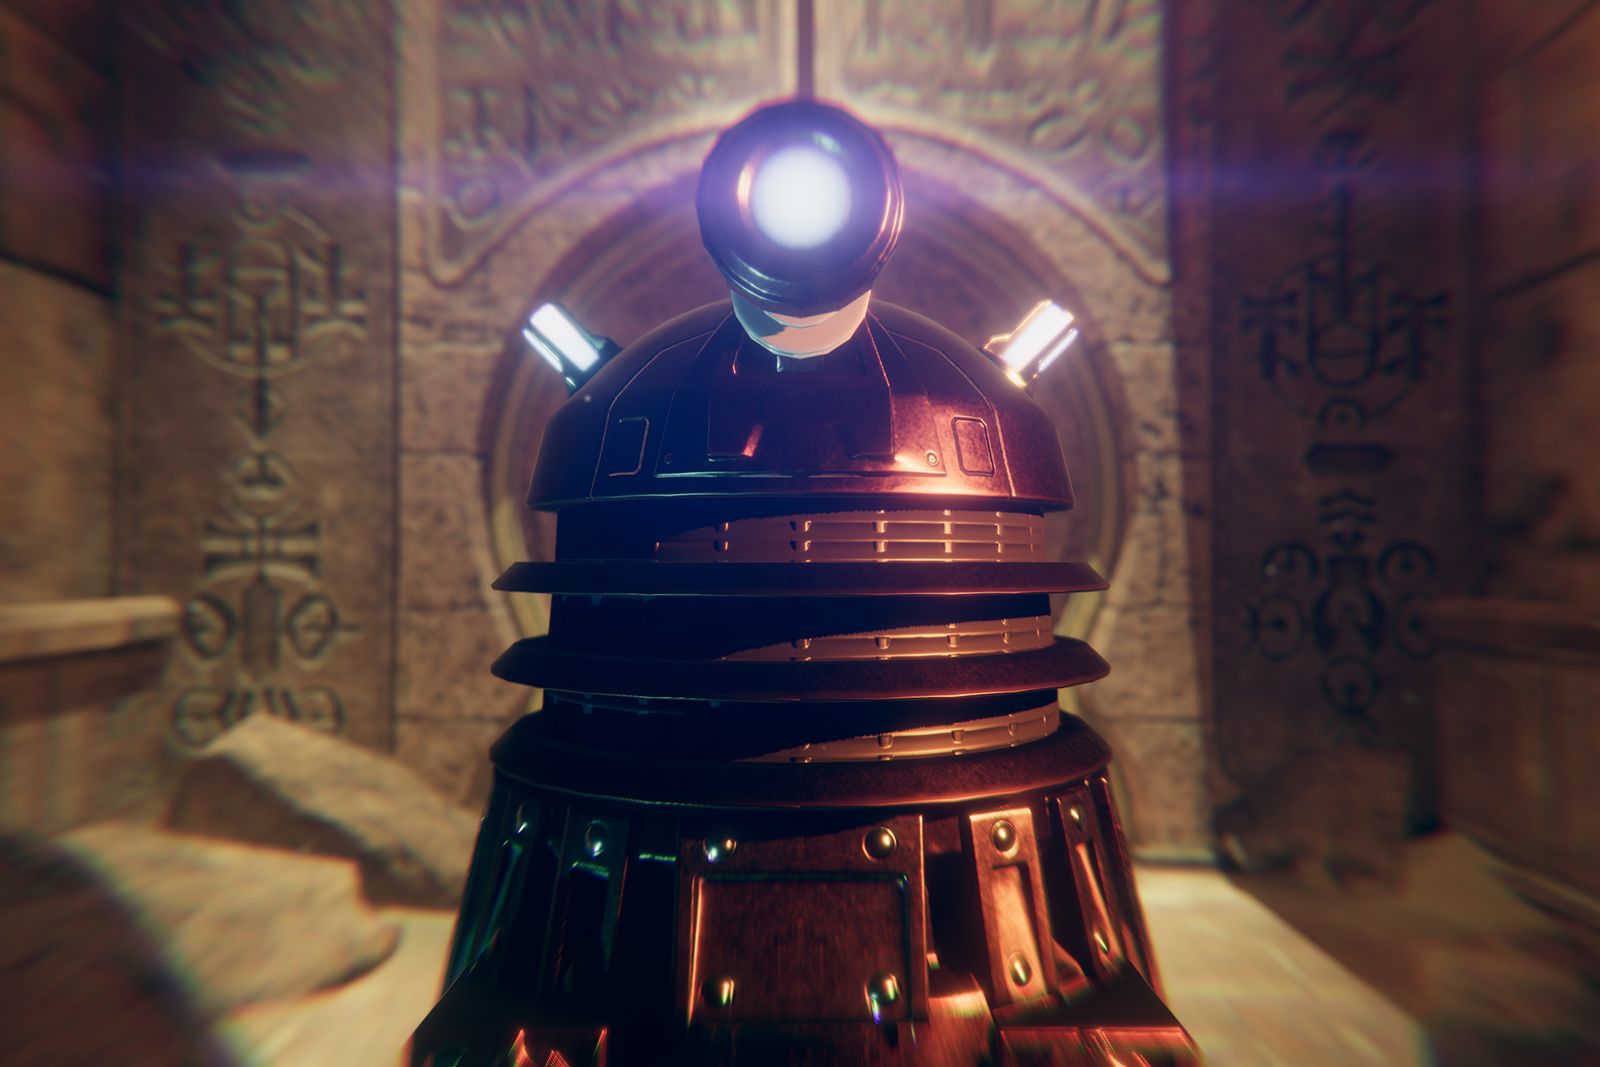 Doctor Who The Edge of Time VR game pits you against the Daleks image 1